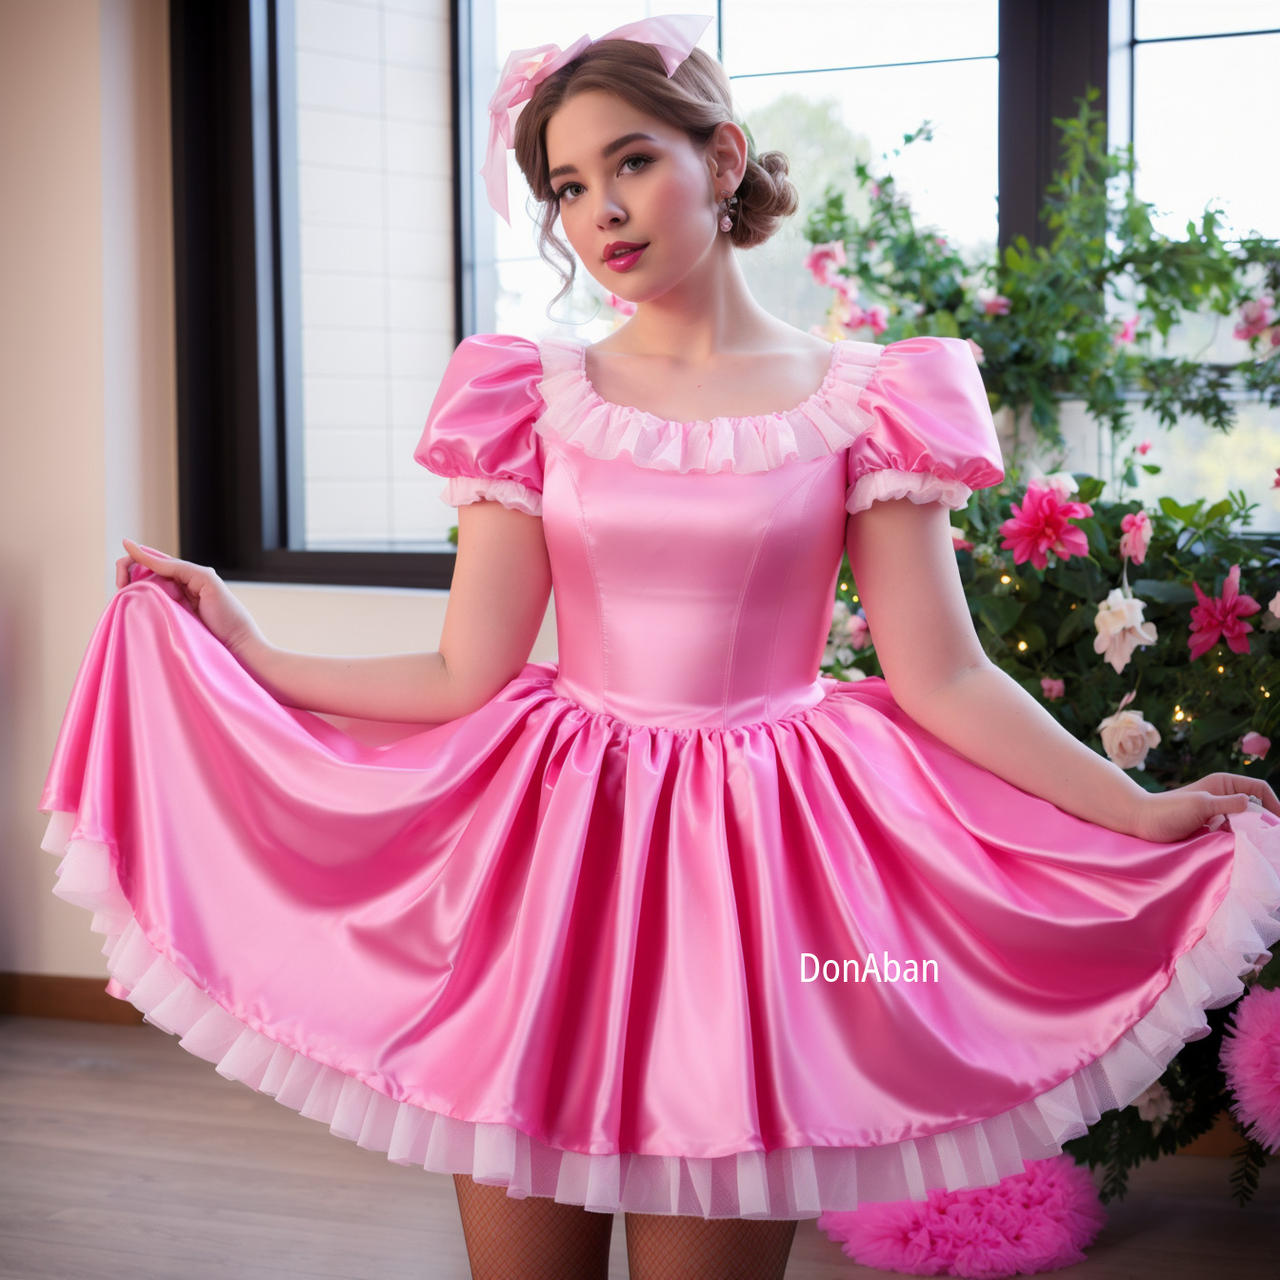 Just a sweet sissy dress by DonAban on DeviantArt